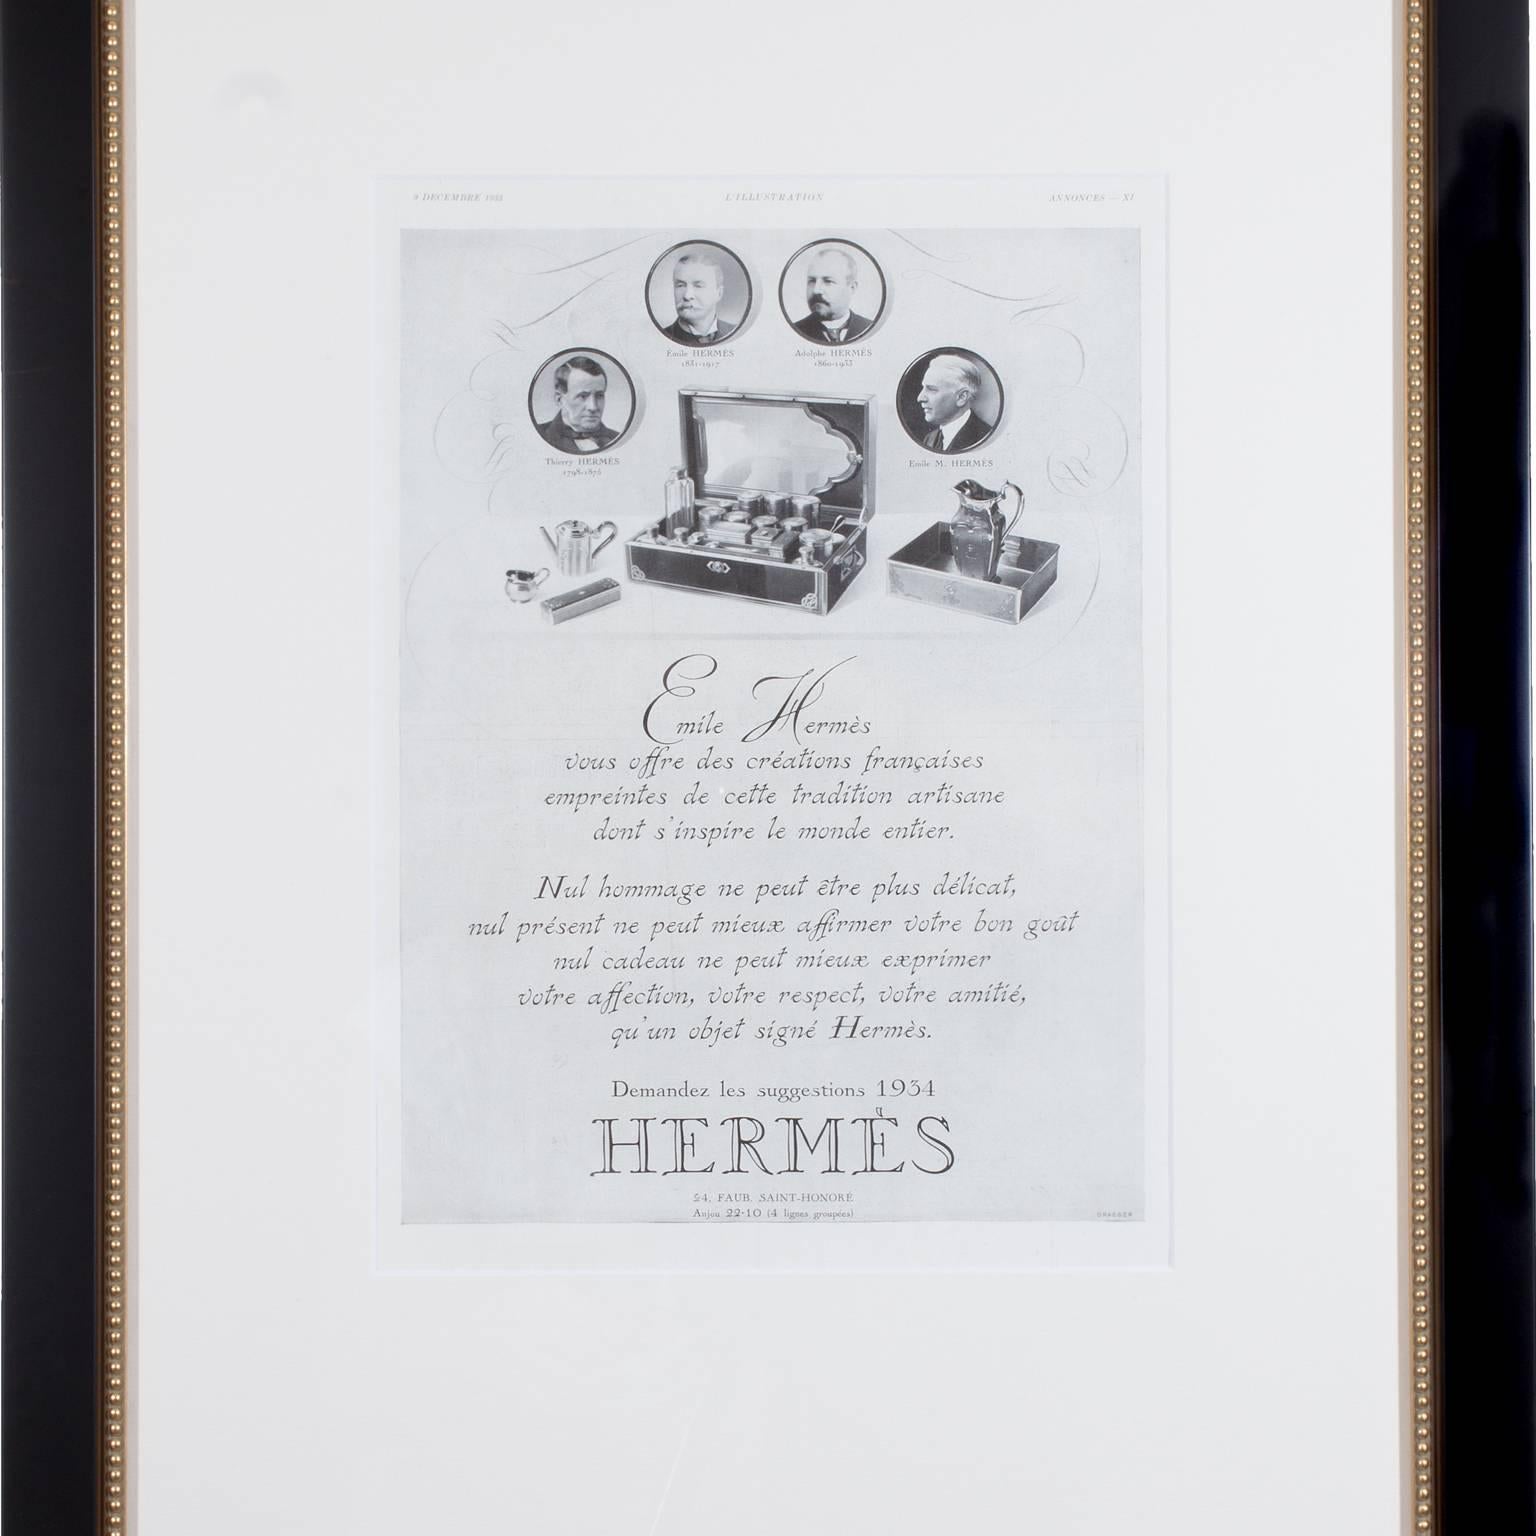 Discovered during our time perusing the Parisian Puces markets, this is an original vintage French advertisement from the 1930's. Framed in a subtle black frame with delicate gold beading. The Hermes brand is the epitome of iconic French